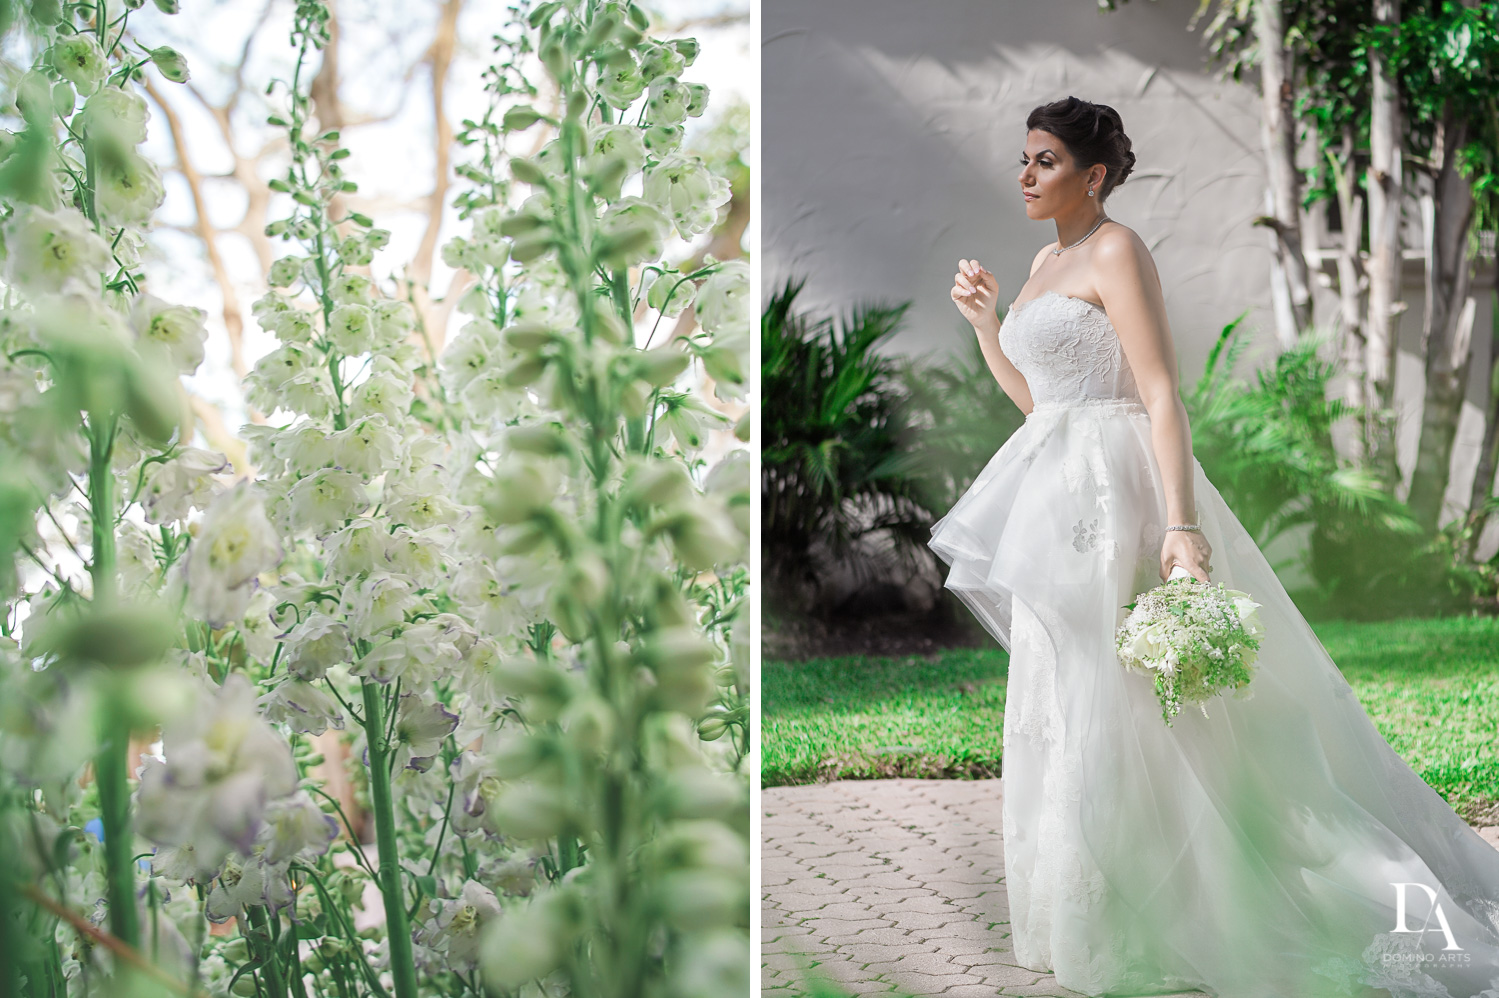 bride at Luxurious Destination Wedding at Fisher Island Miami by Domino Arts Photography